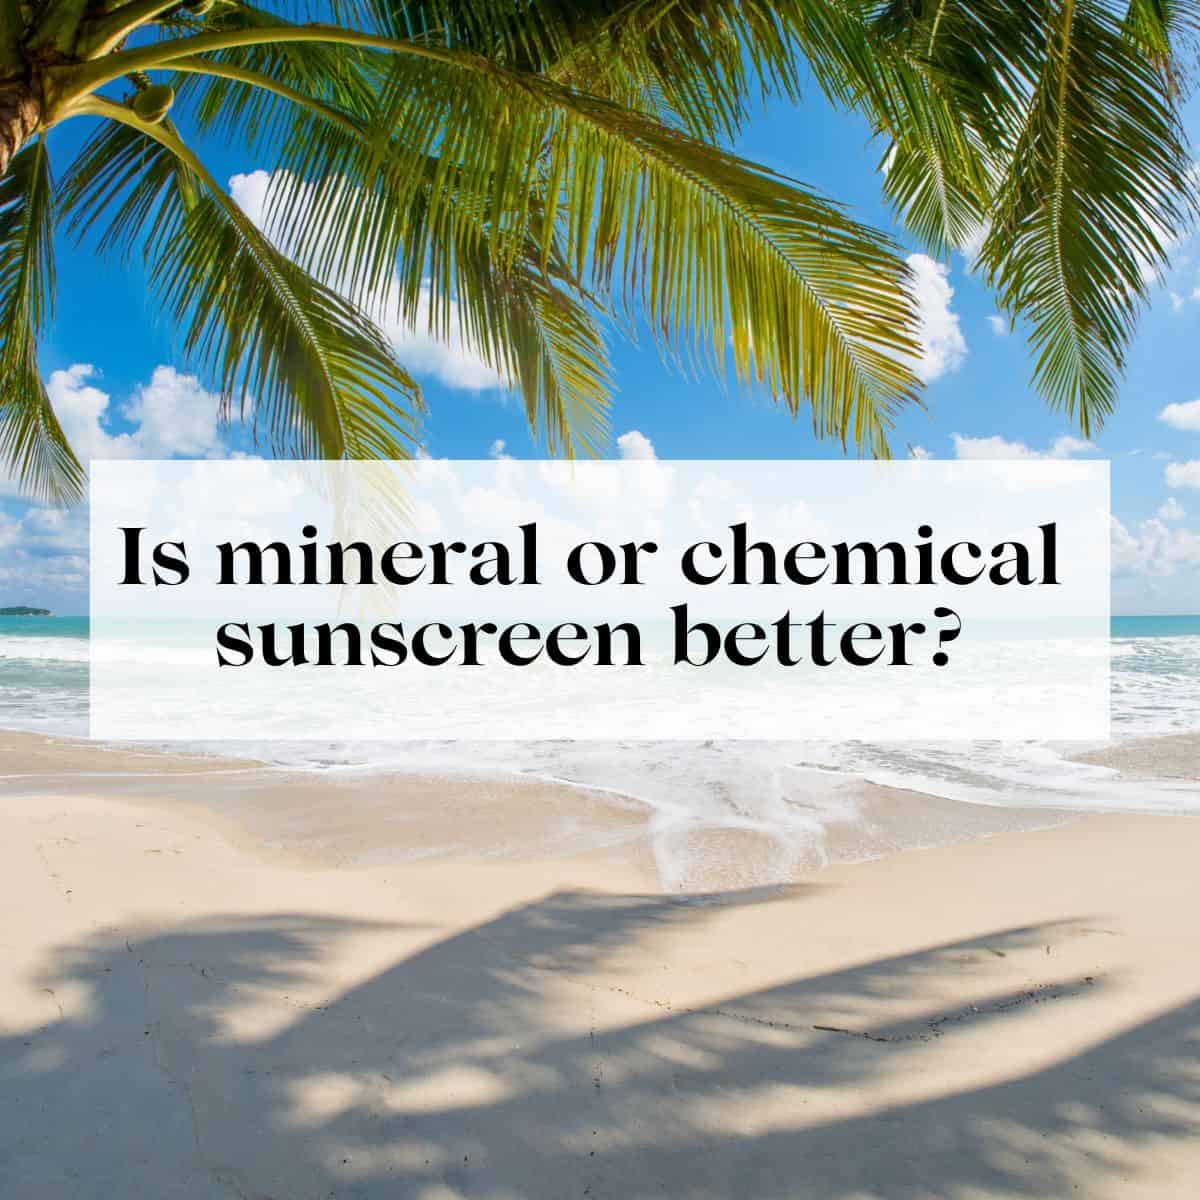 A beach with a palm tree on it and the title "is mineral or chemical sunscreen better?" over it.